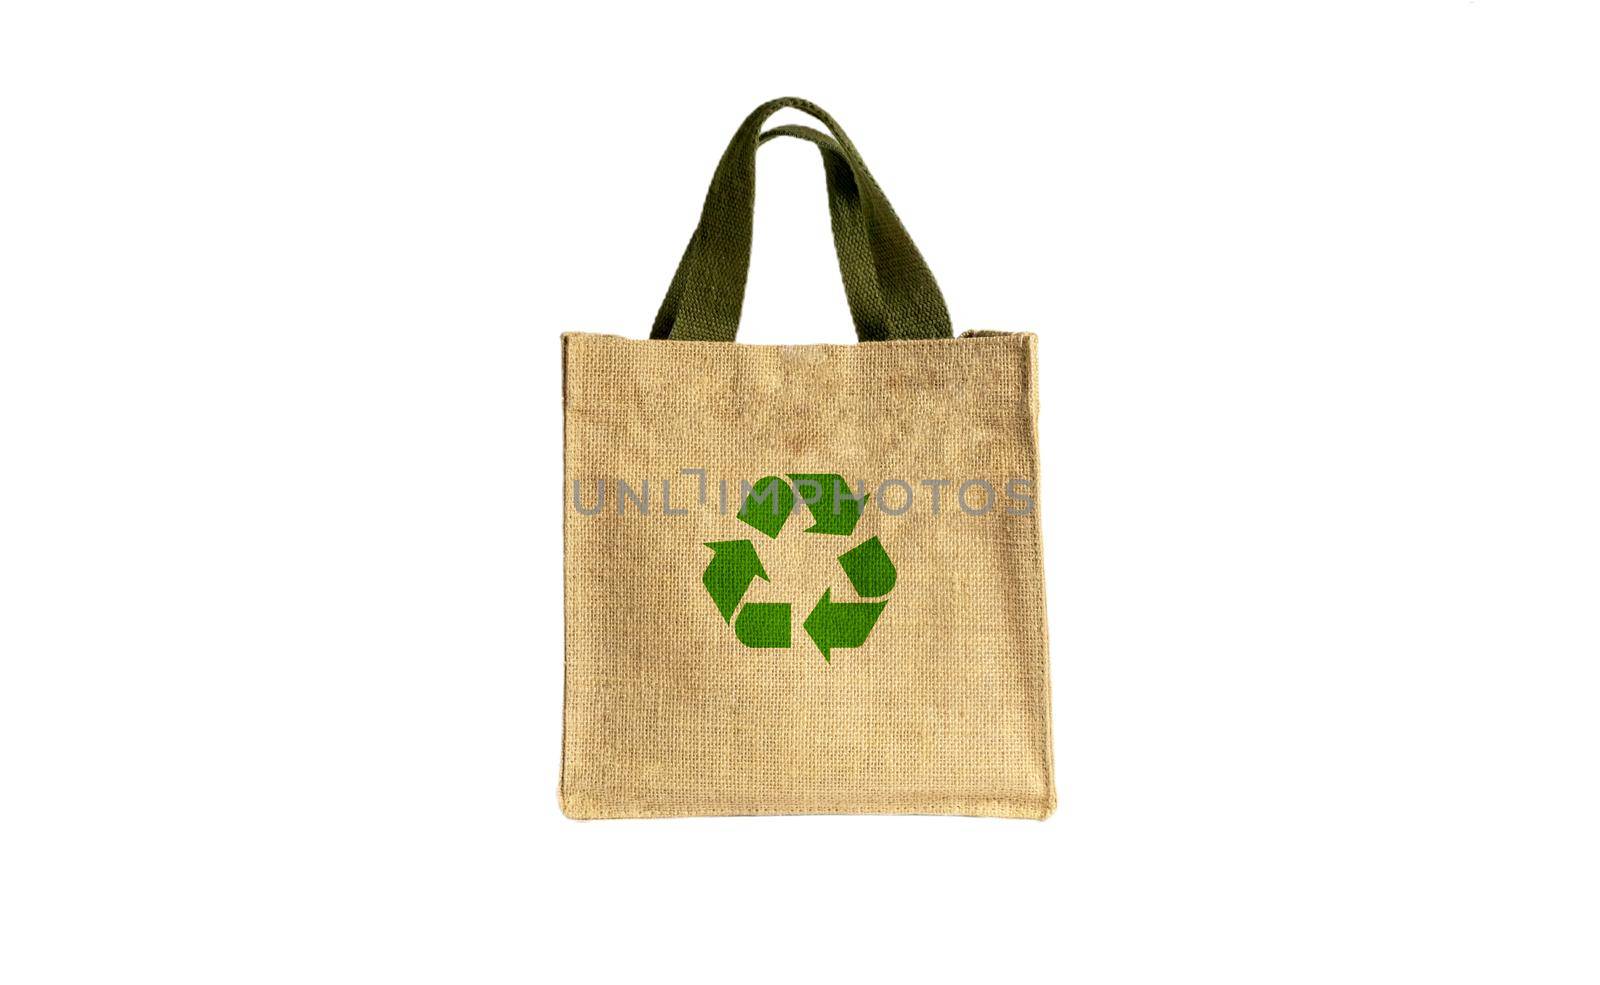 cloth eco bags blank or cotton yarn cloth bags, empty bags and green recycling symbol isolated on white, fabric cloth eco bag green empty template for campaign to use bags to reduce waste plastic